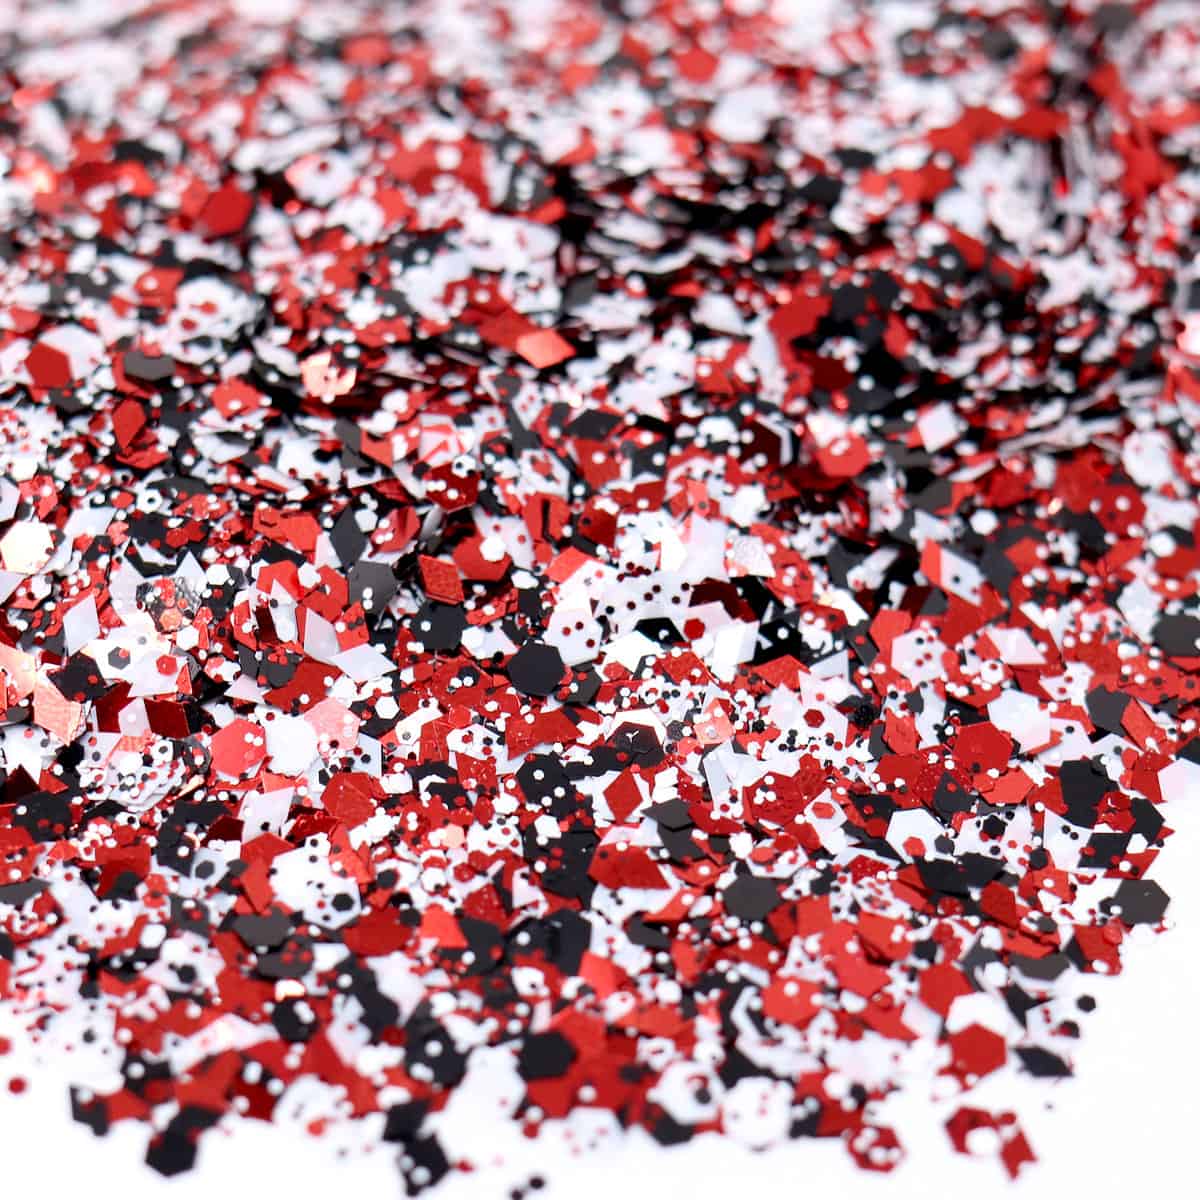 Flaky black and red glitter